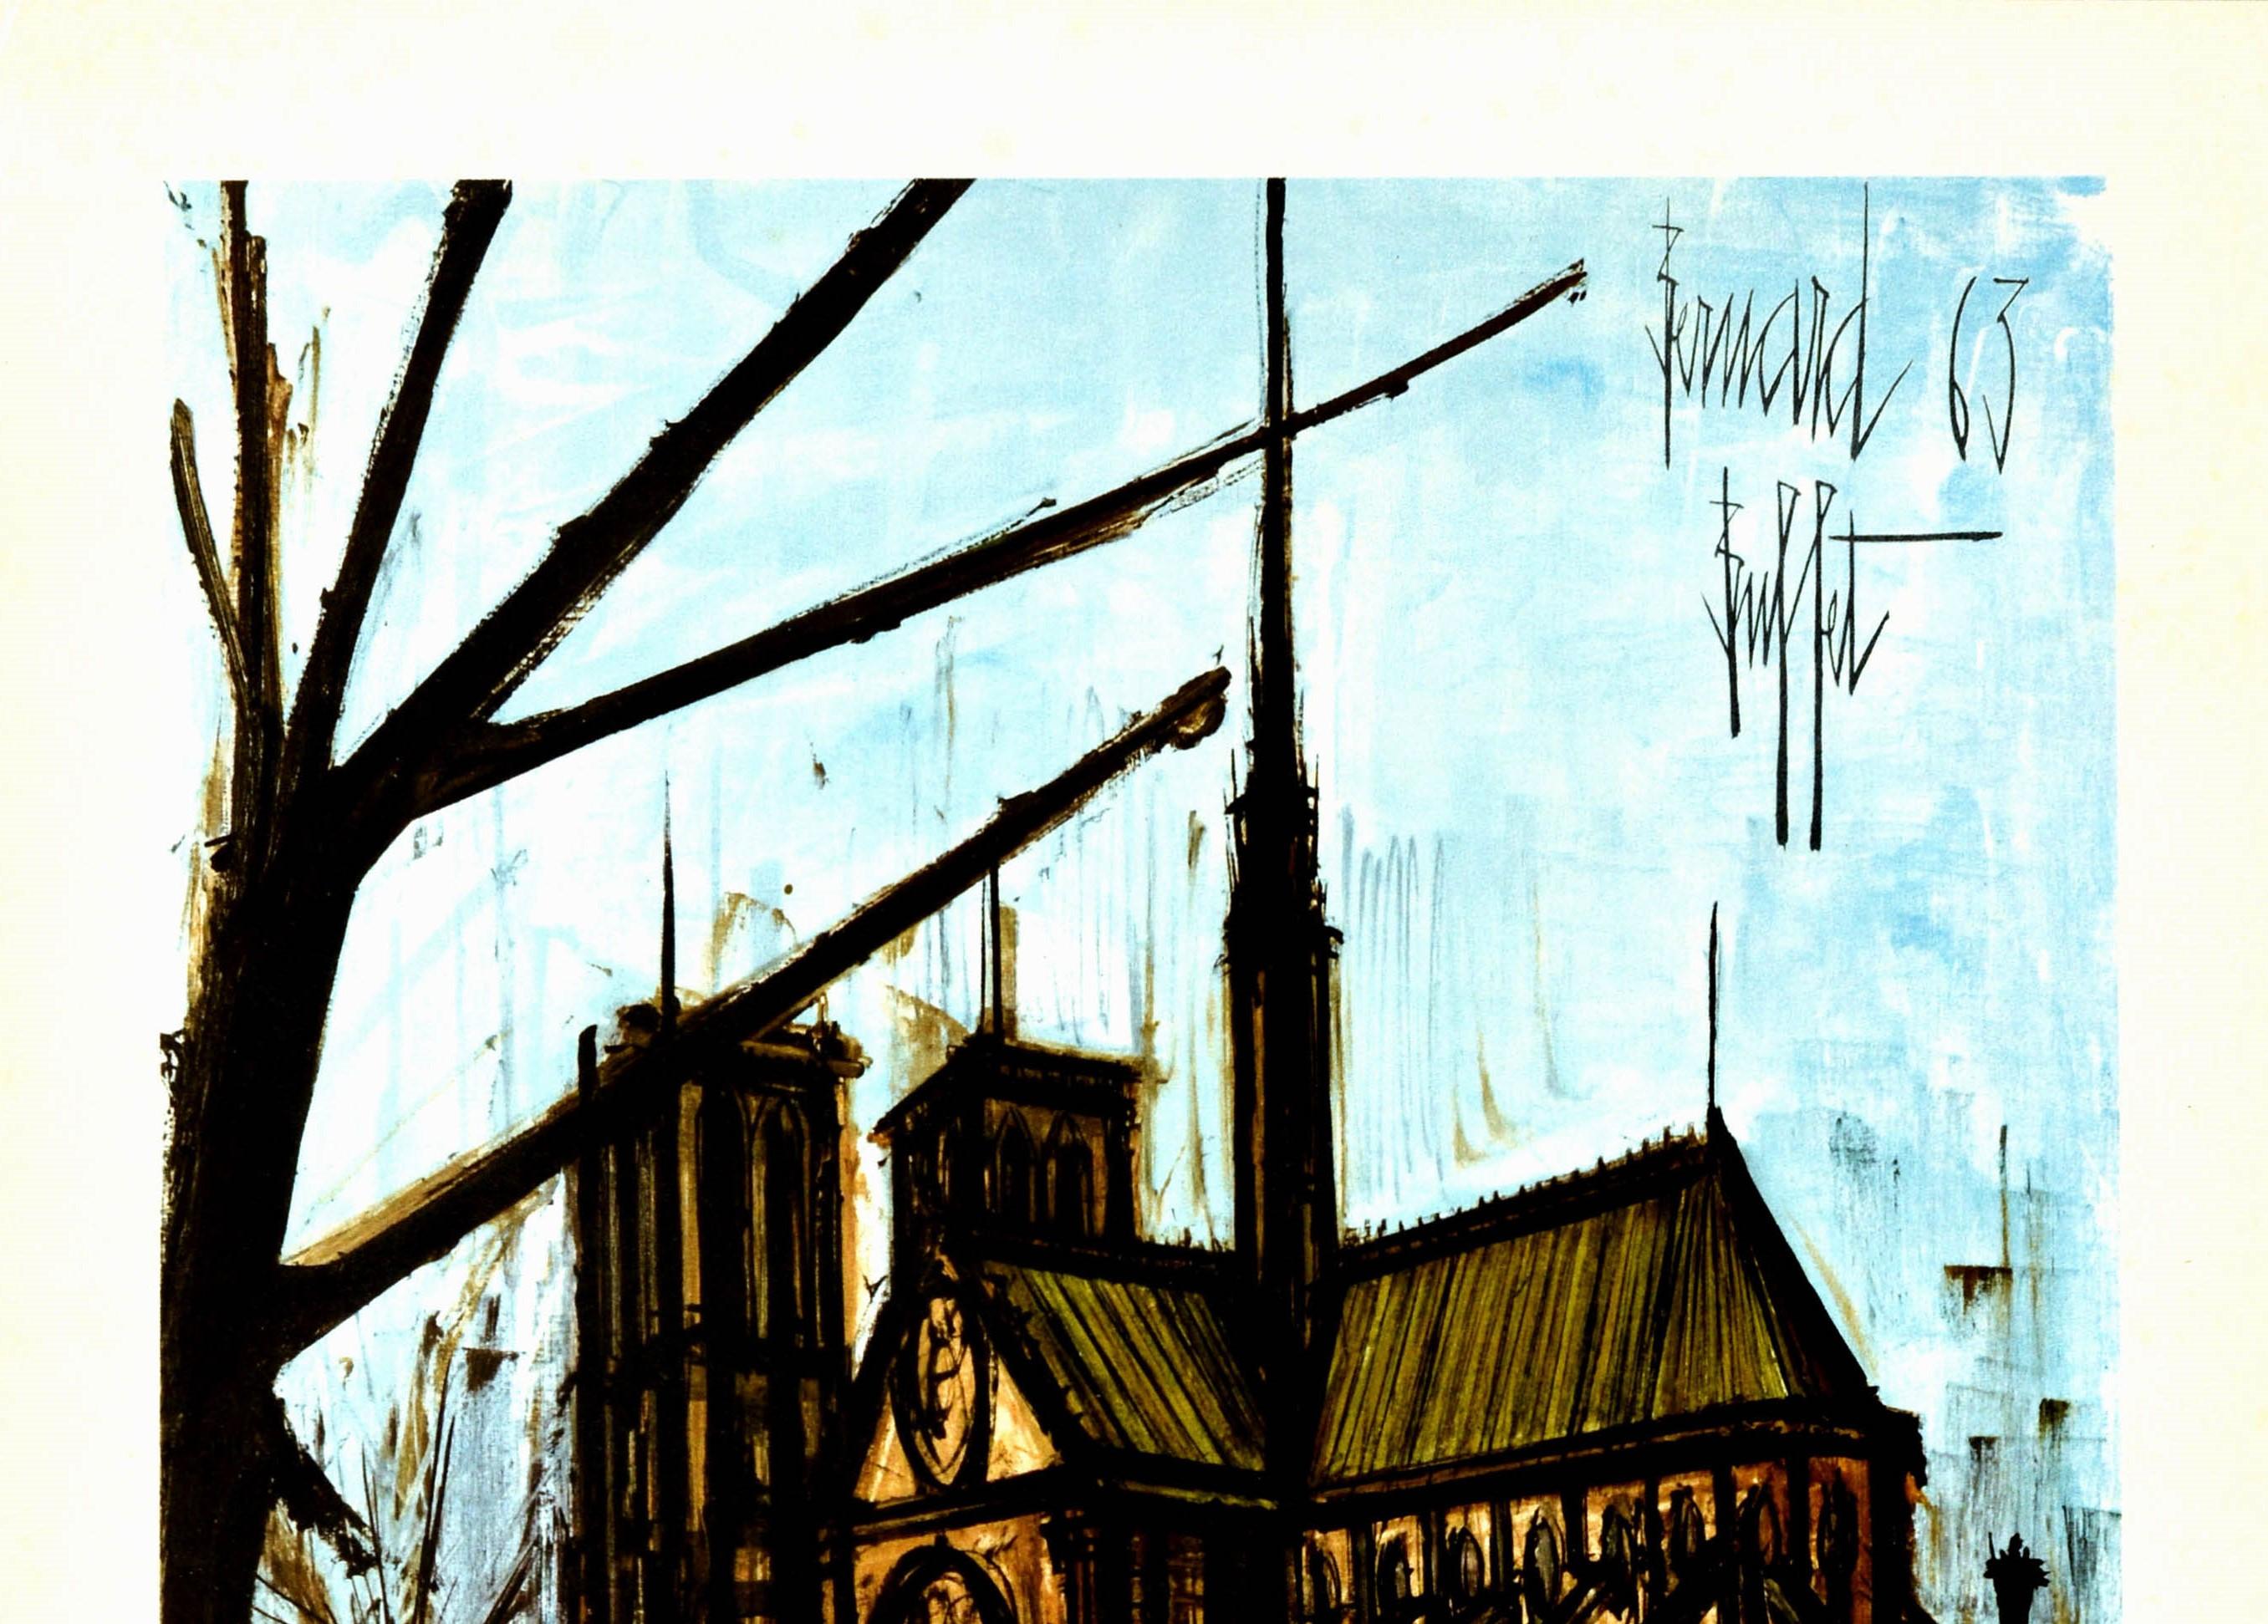 Original vintage travel poster for Paris issued by French National Railways / Chemin De Fer Francais featuring great artwork by the notable French expressionist painter Bernard Buffet (1928-1999) featuring the historic medieval Notre Dame cathedral